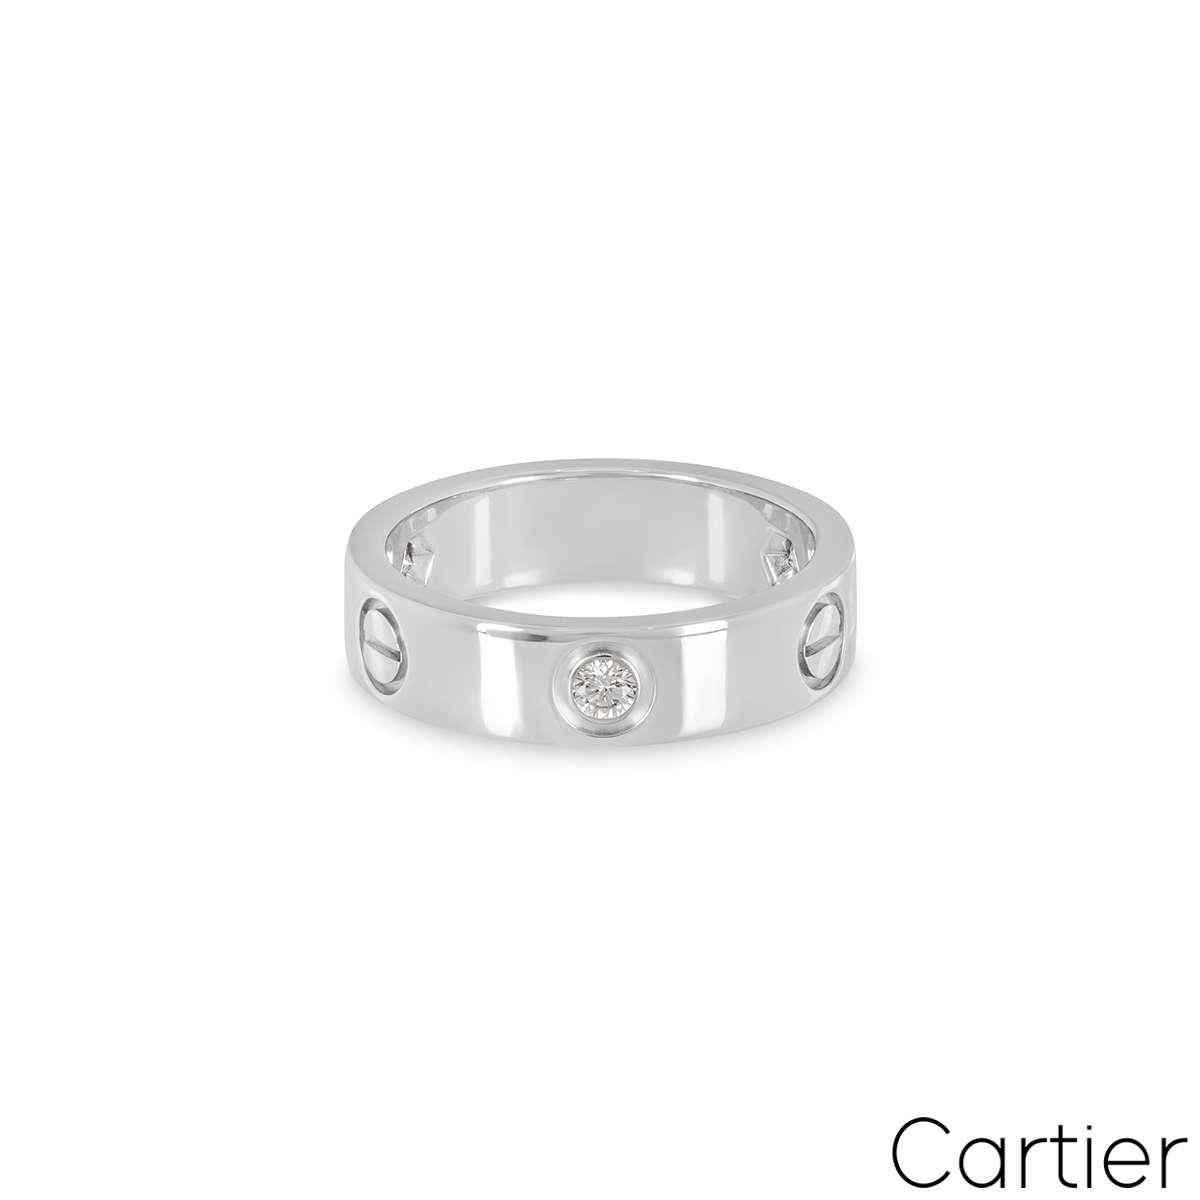 Round Cut Cartier White Gold Half Diamond Love Ring Size 56 B4032500 For Sale